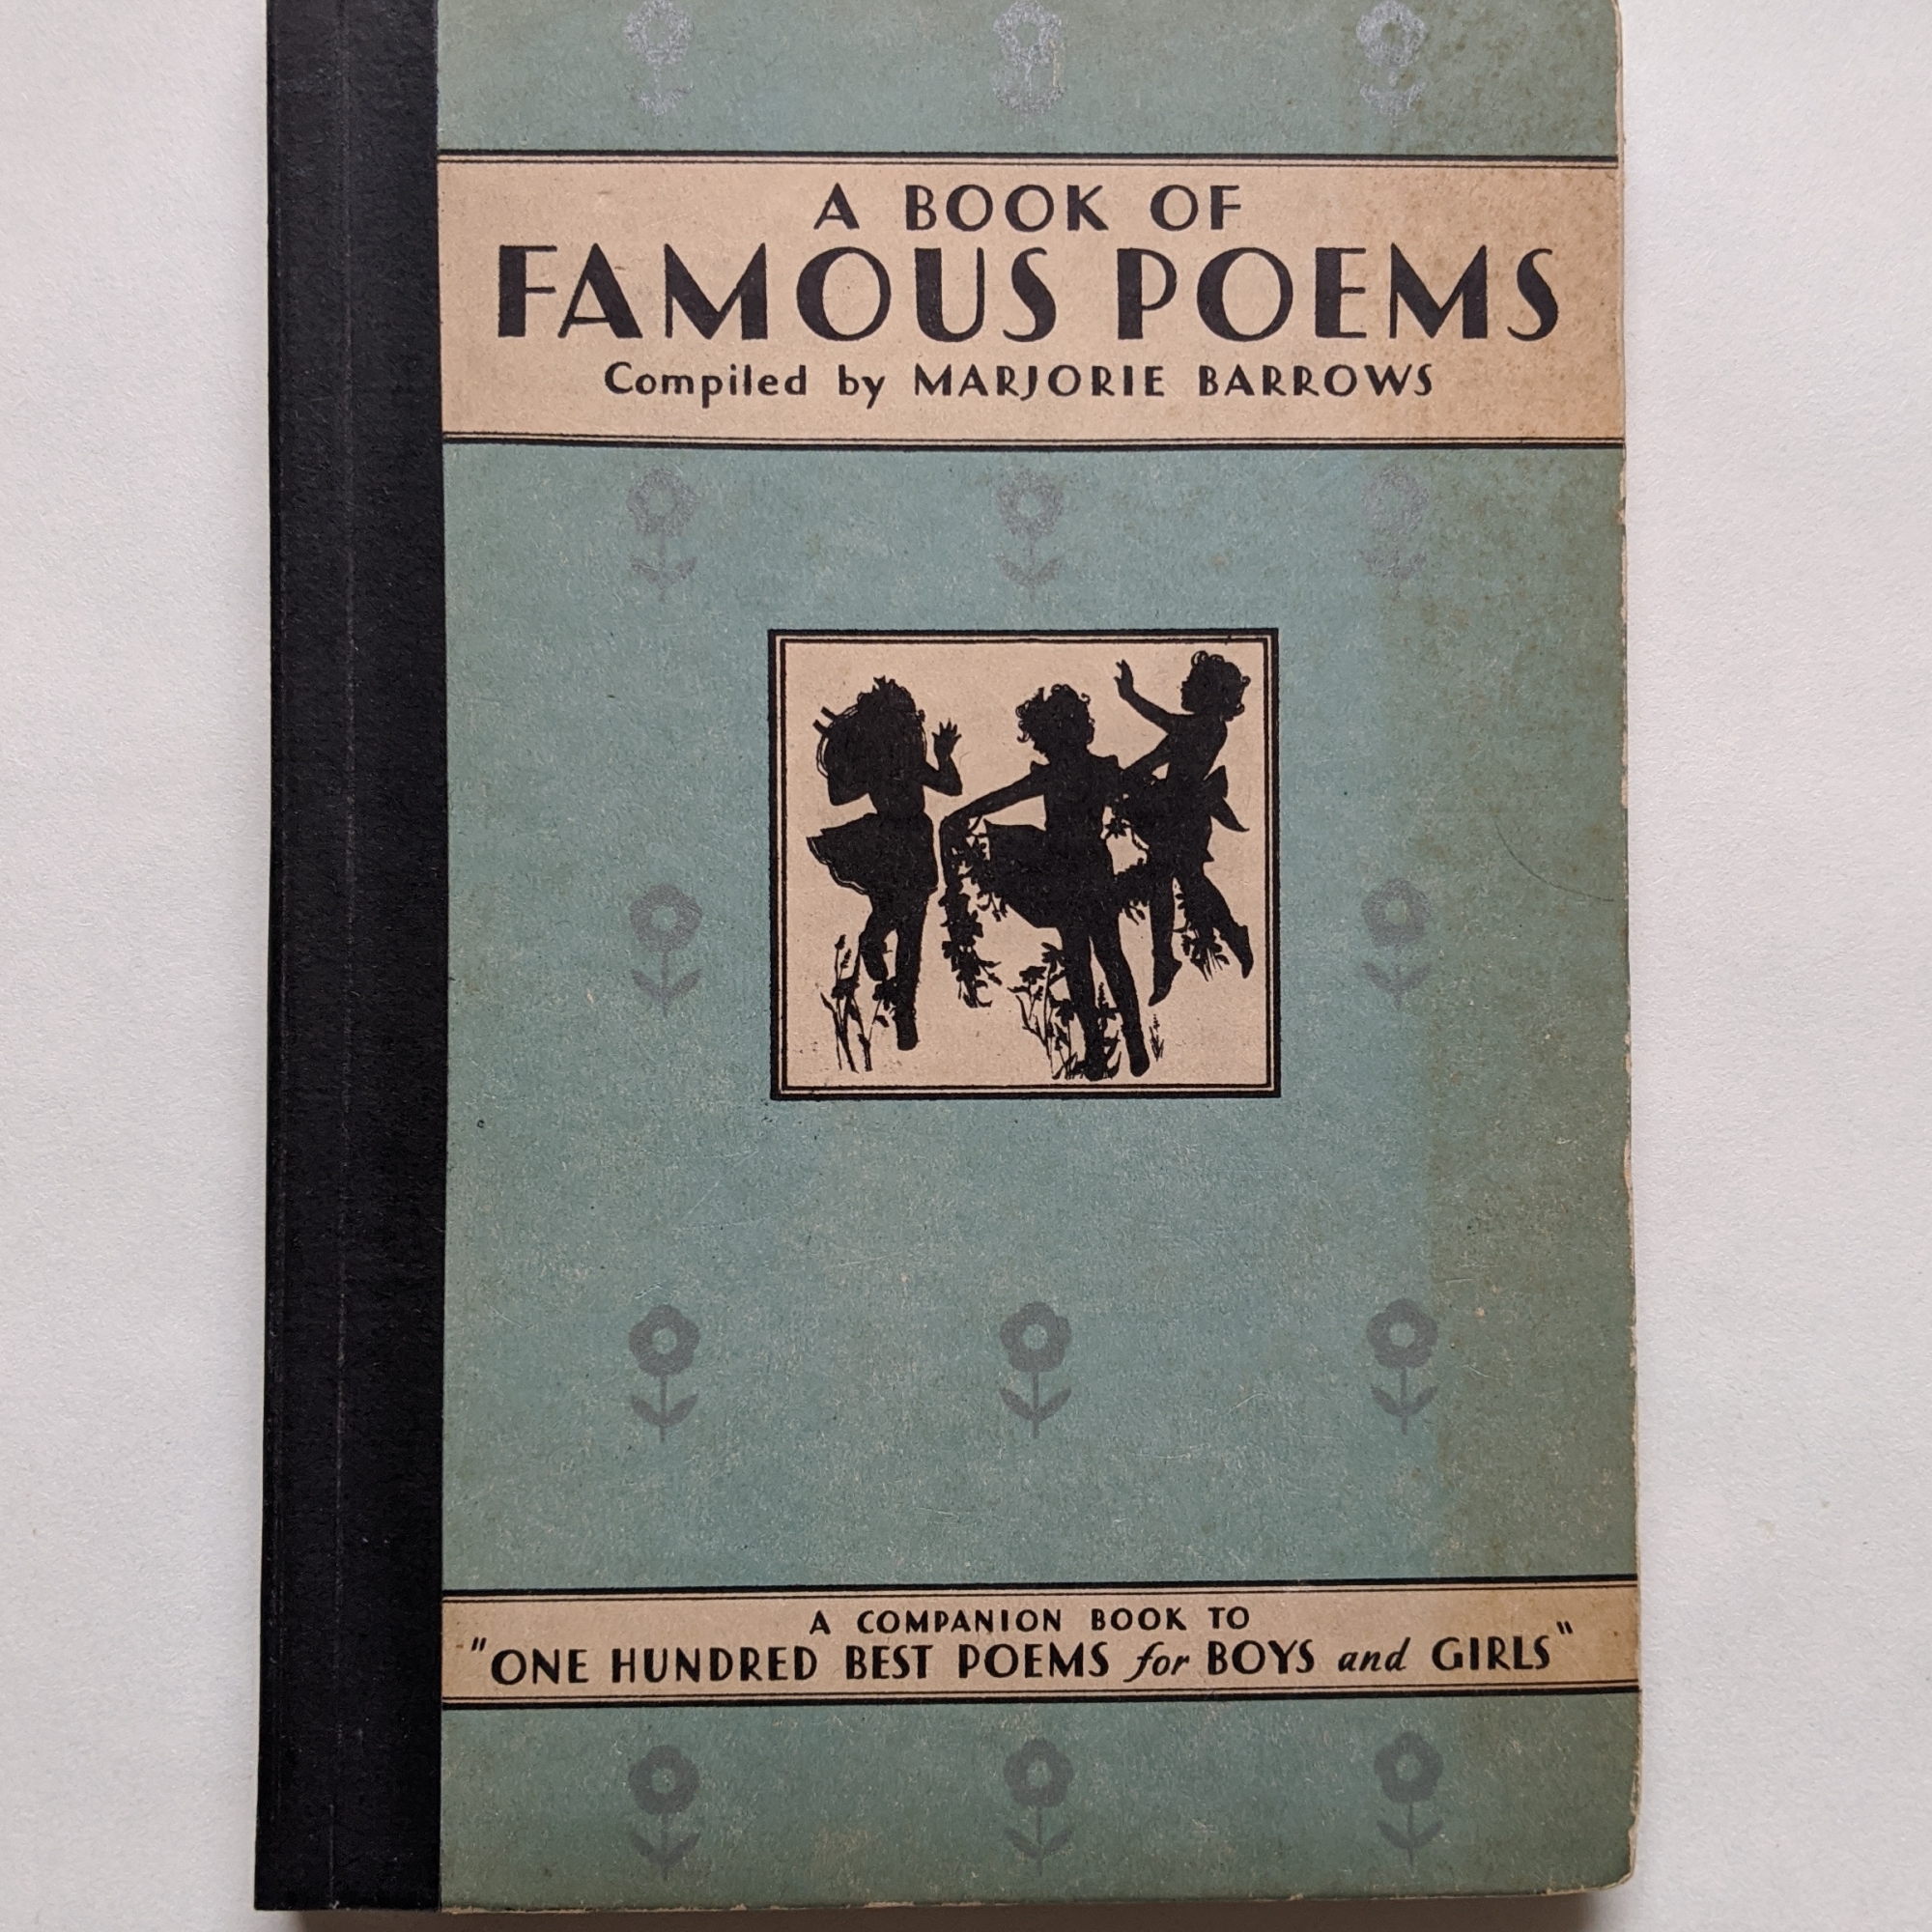 Holly Smith Book and Paper Conservation, Brighton, UK. A Book of Famous Poems - After Treatment